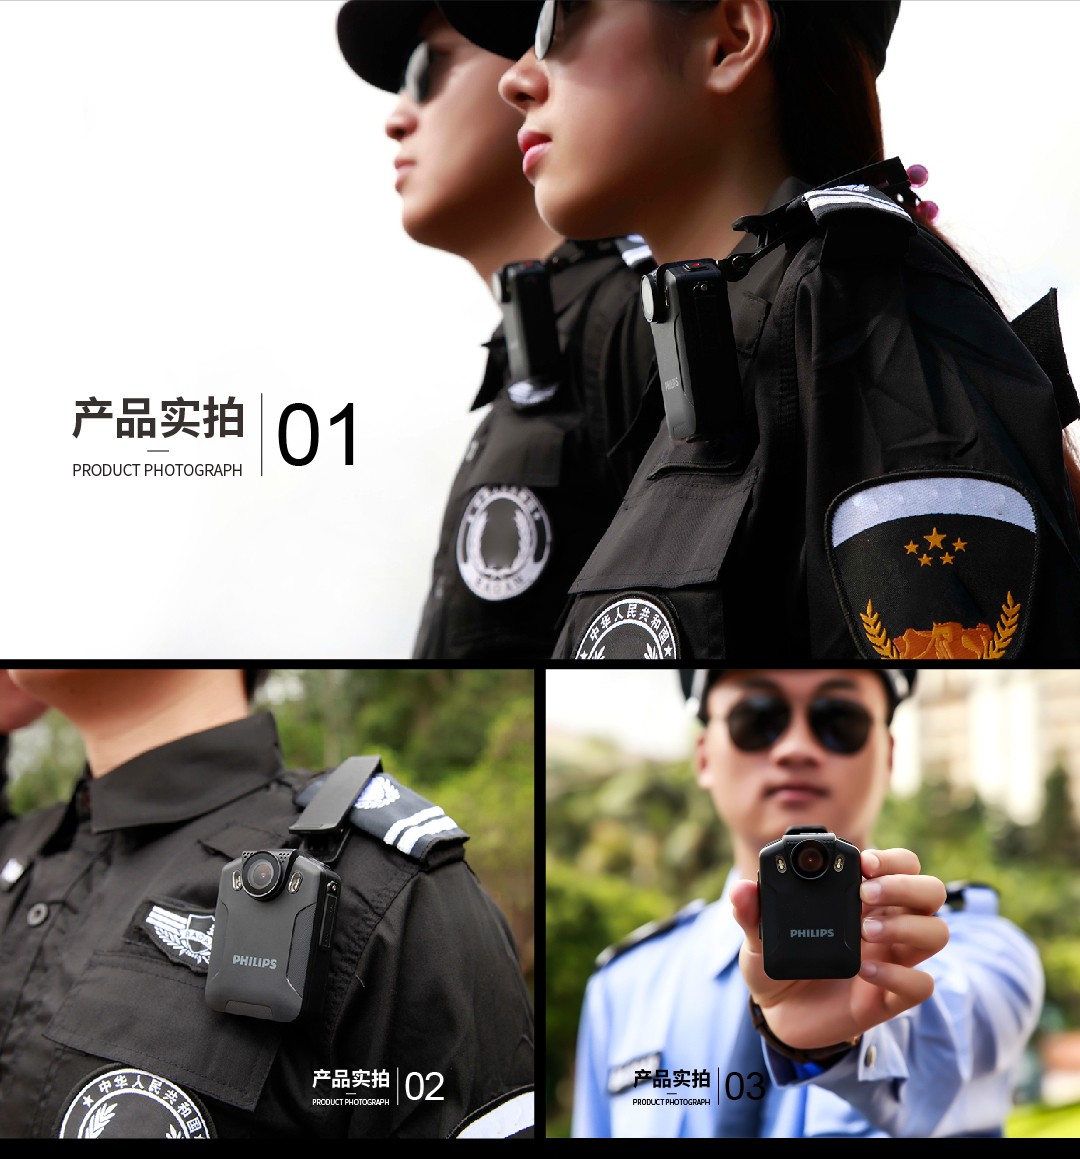 VTR8101 Starlight Night Vision Police Body Wonr Camera with Motion Detection for Security Law Enforcement Use